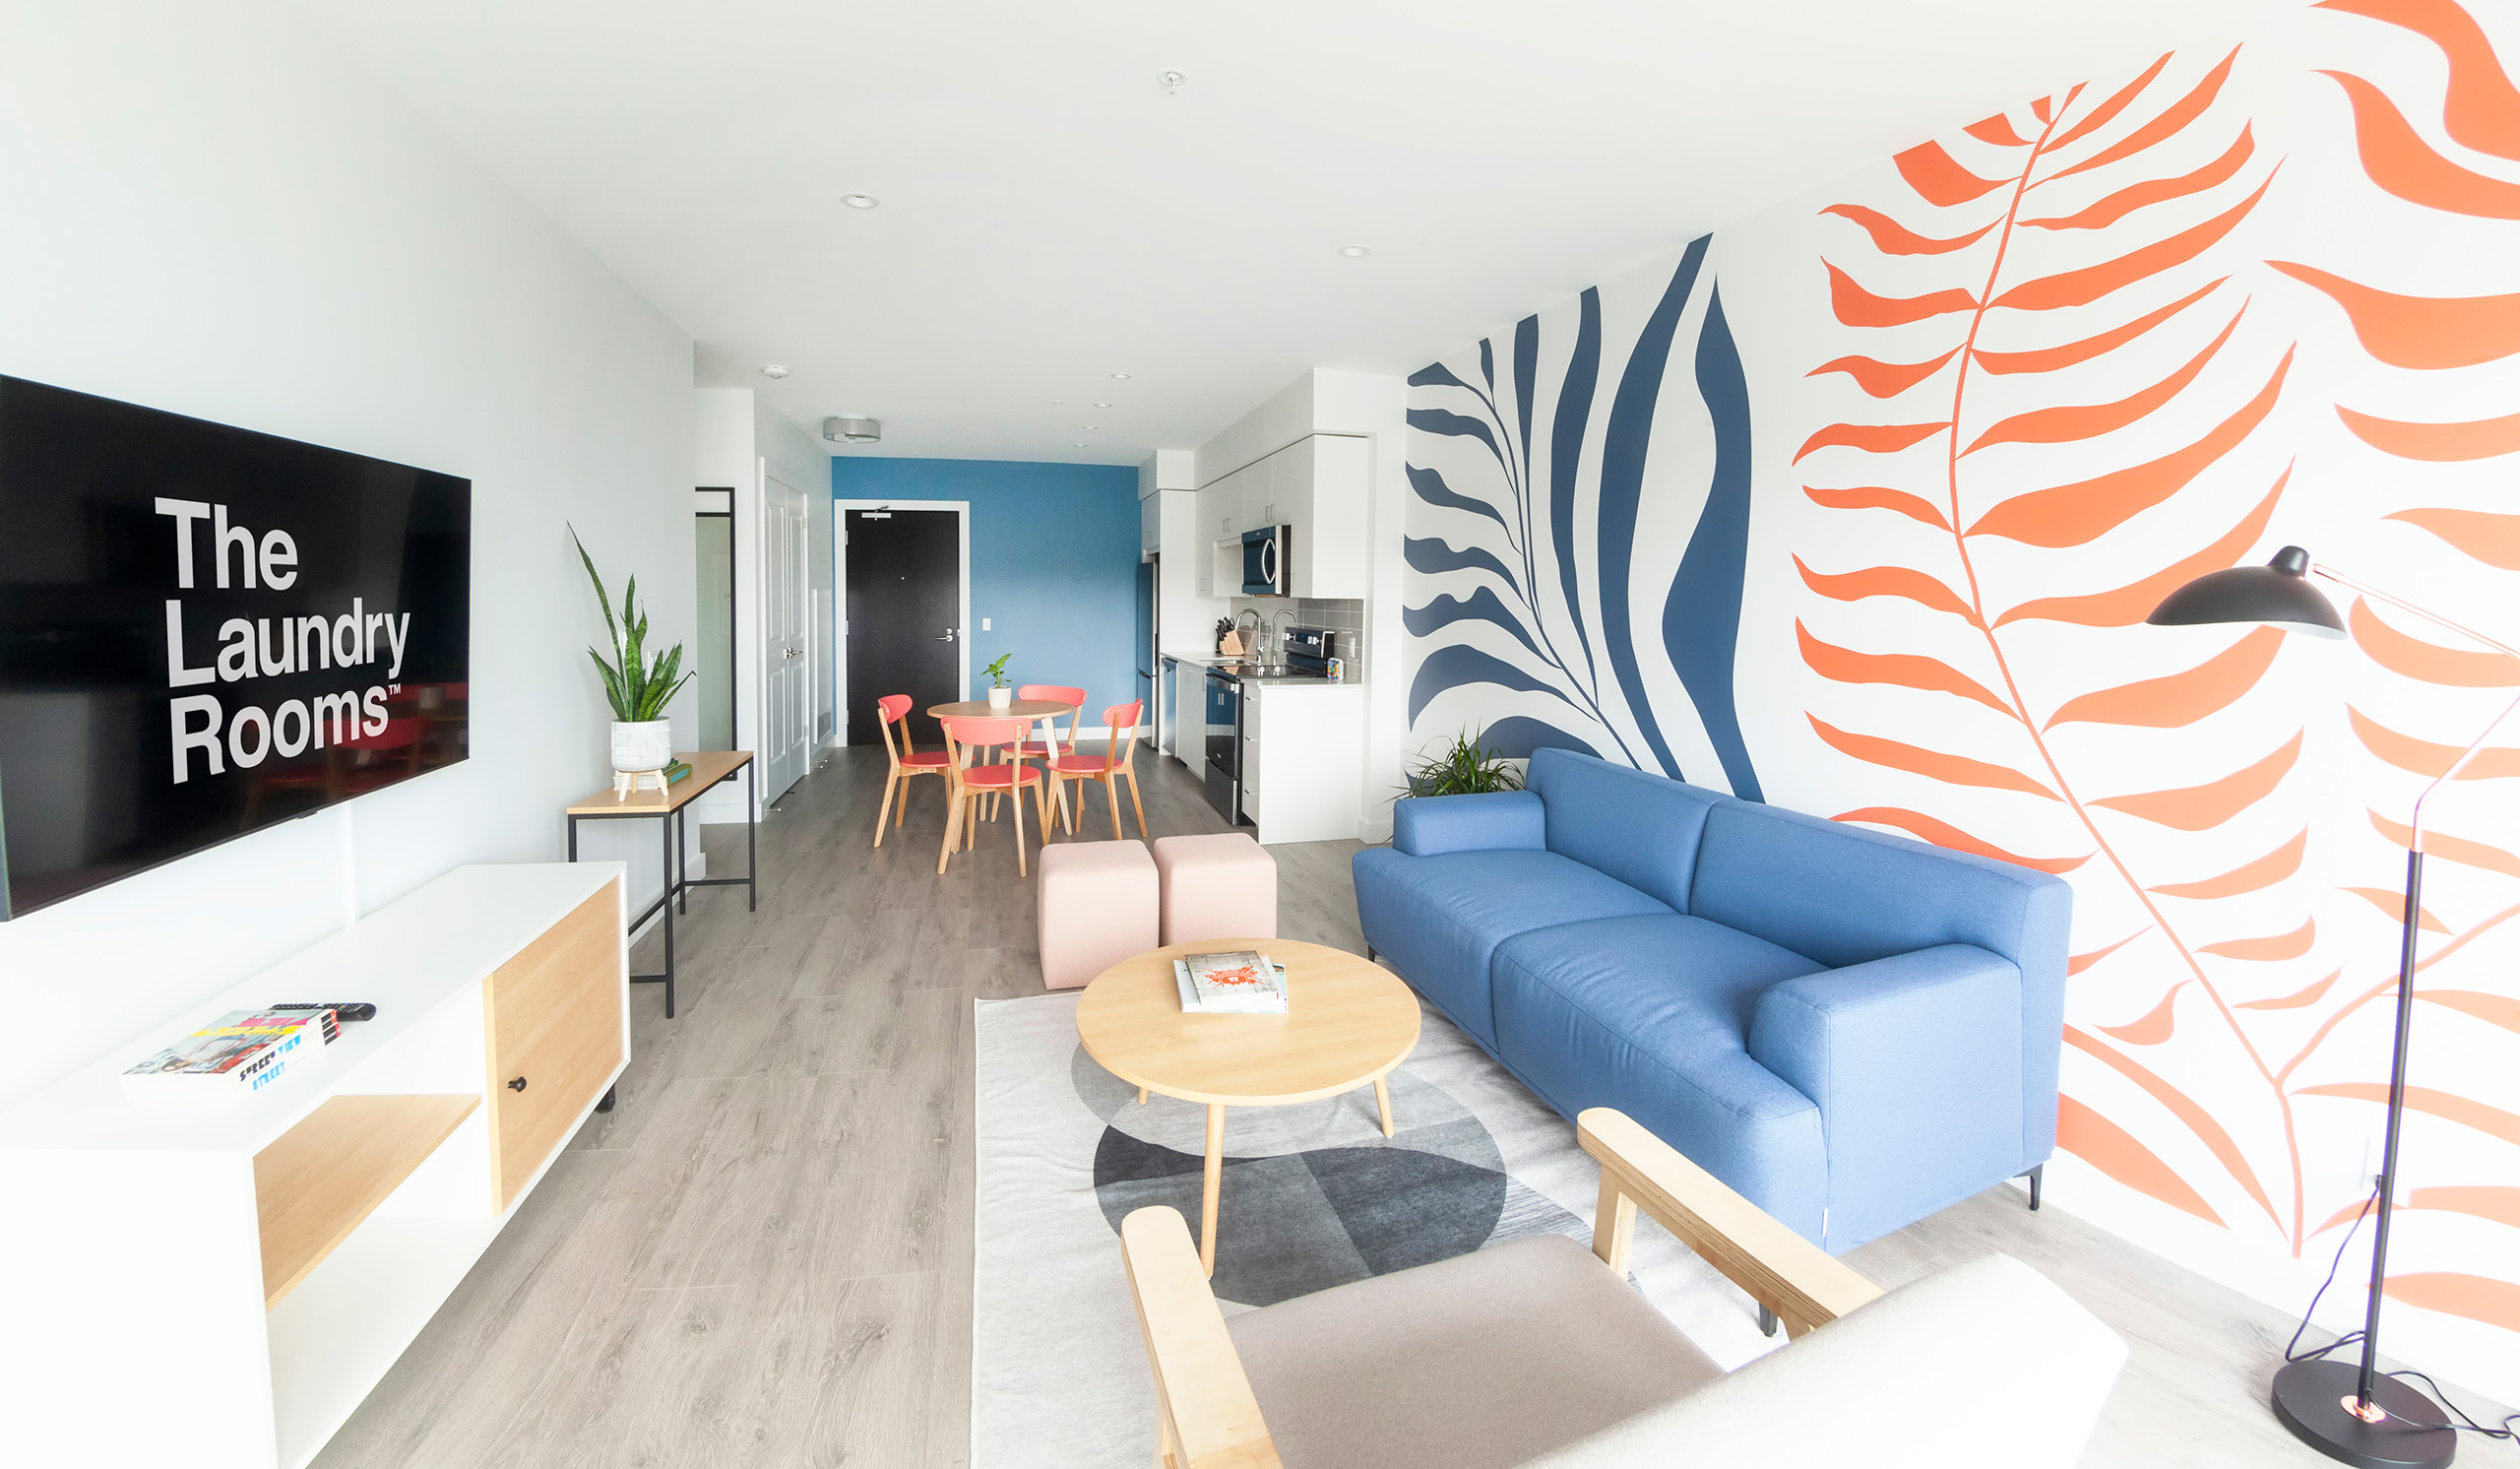 Blue and orange themed suite at The Laundry Rooms Cambridge